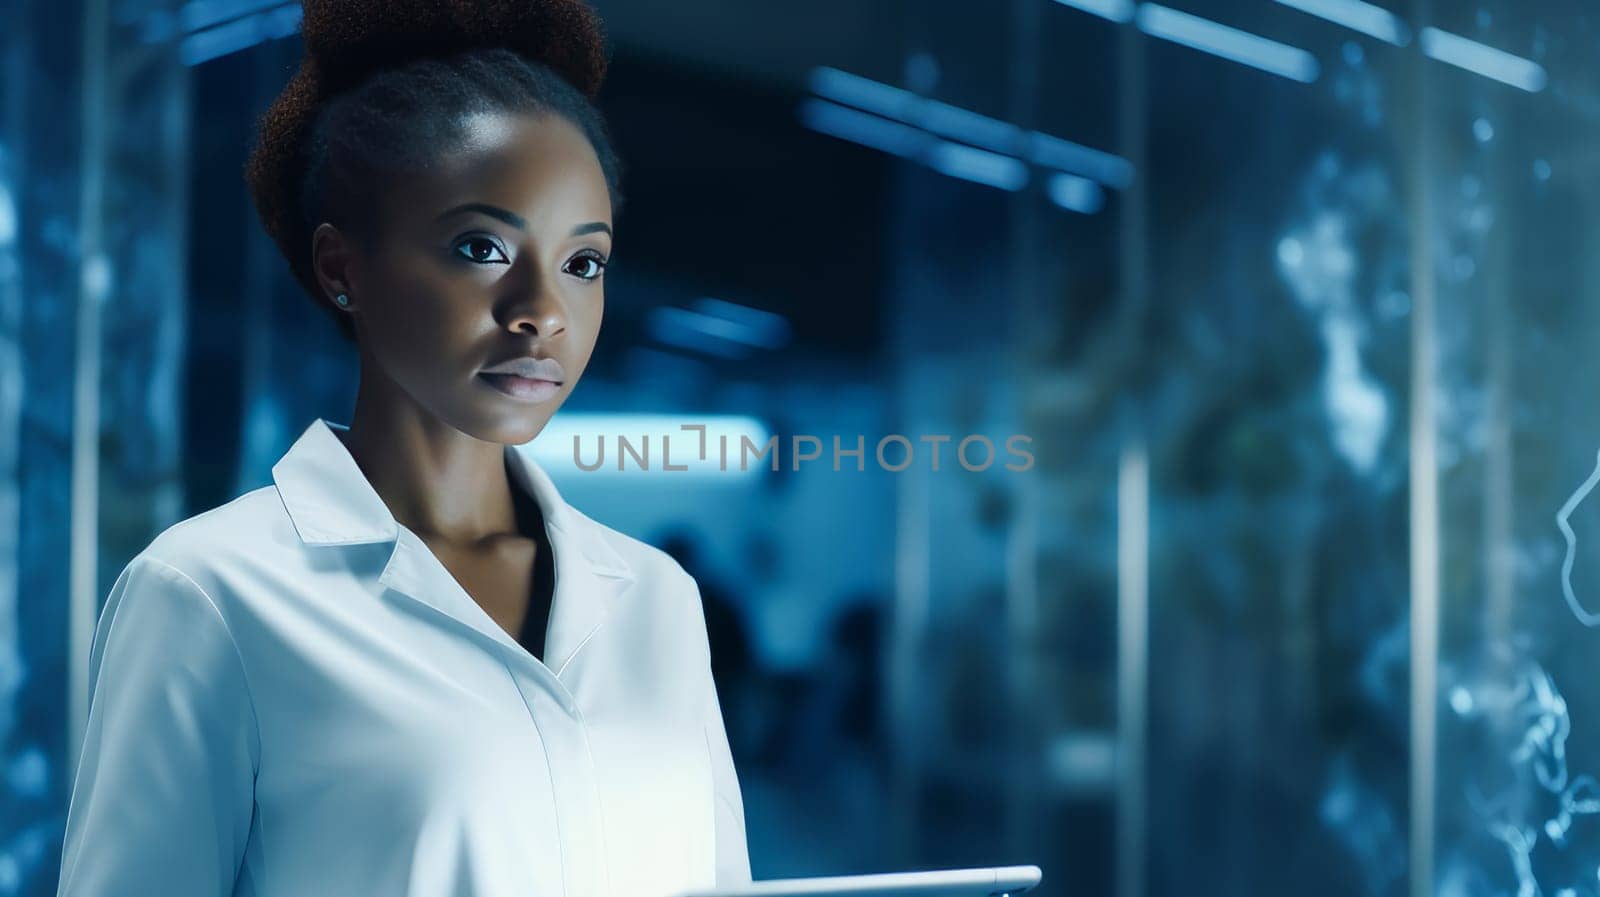 A dark-skinned African American woman in a medical modern bright hospital with modern equipment, where a person undergoes an by Alla_Yurtayeva